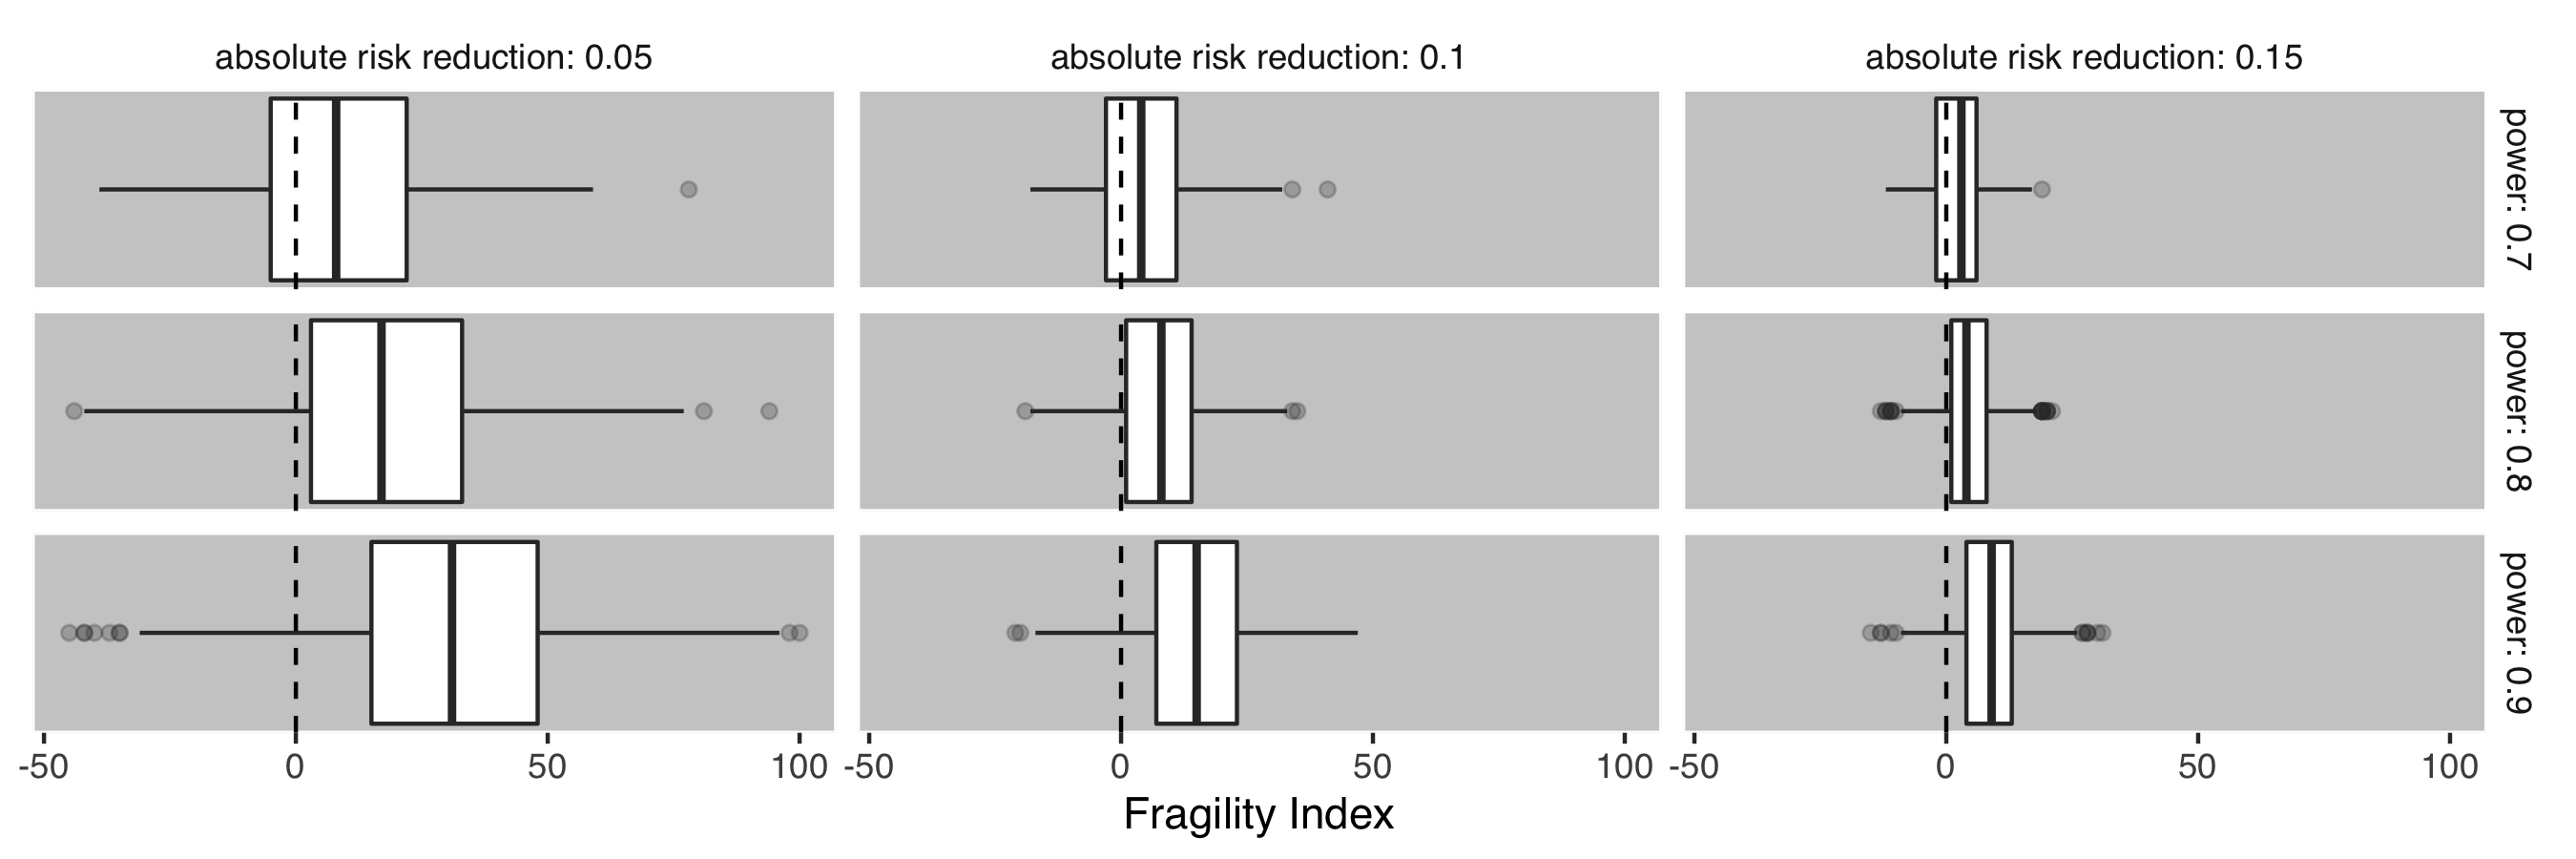 *Box and Whisker plots demonstrating the distribution of fragility index over a range of possible study scenarios. Each facet details 1000 realisations of the simulation. Levels of absolute risk reduction and power are organised by column and row respectively.*